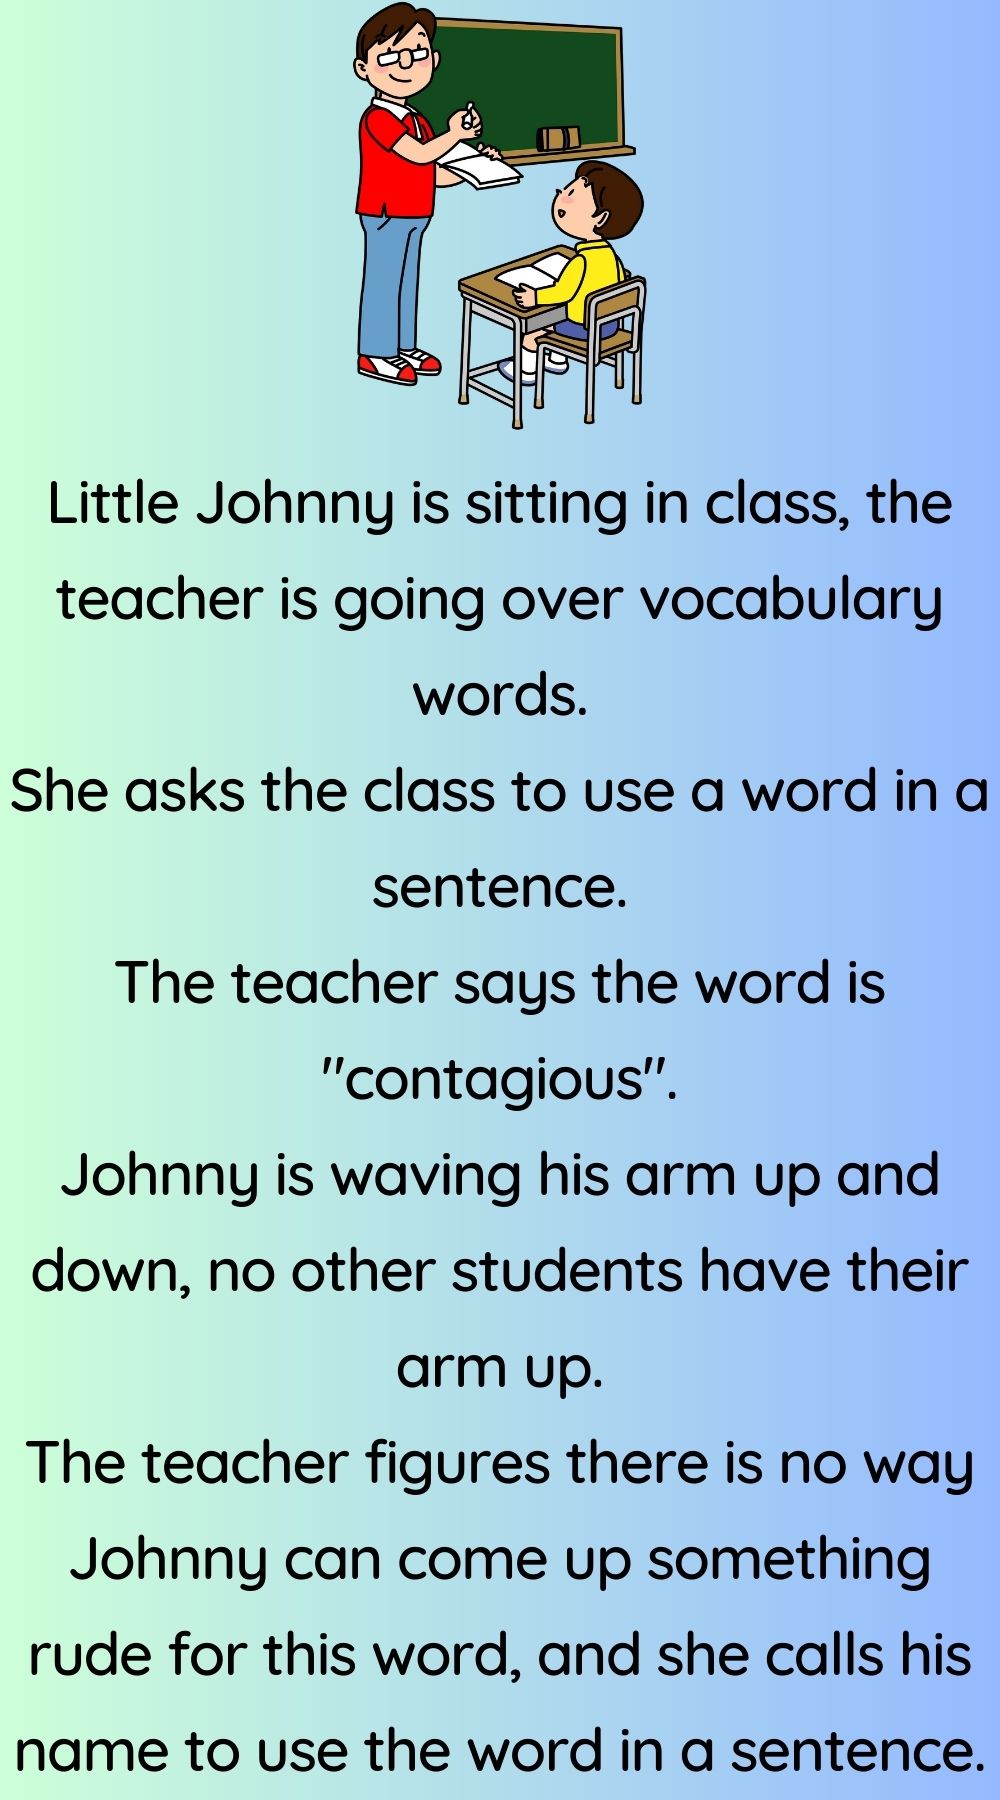 Little Johnny is sitting in class